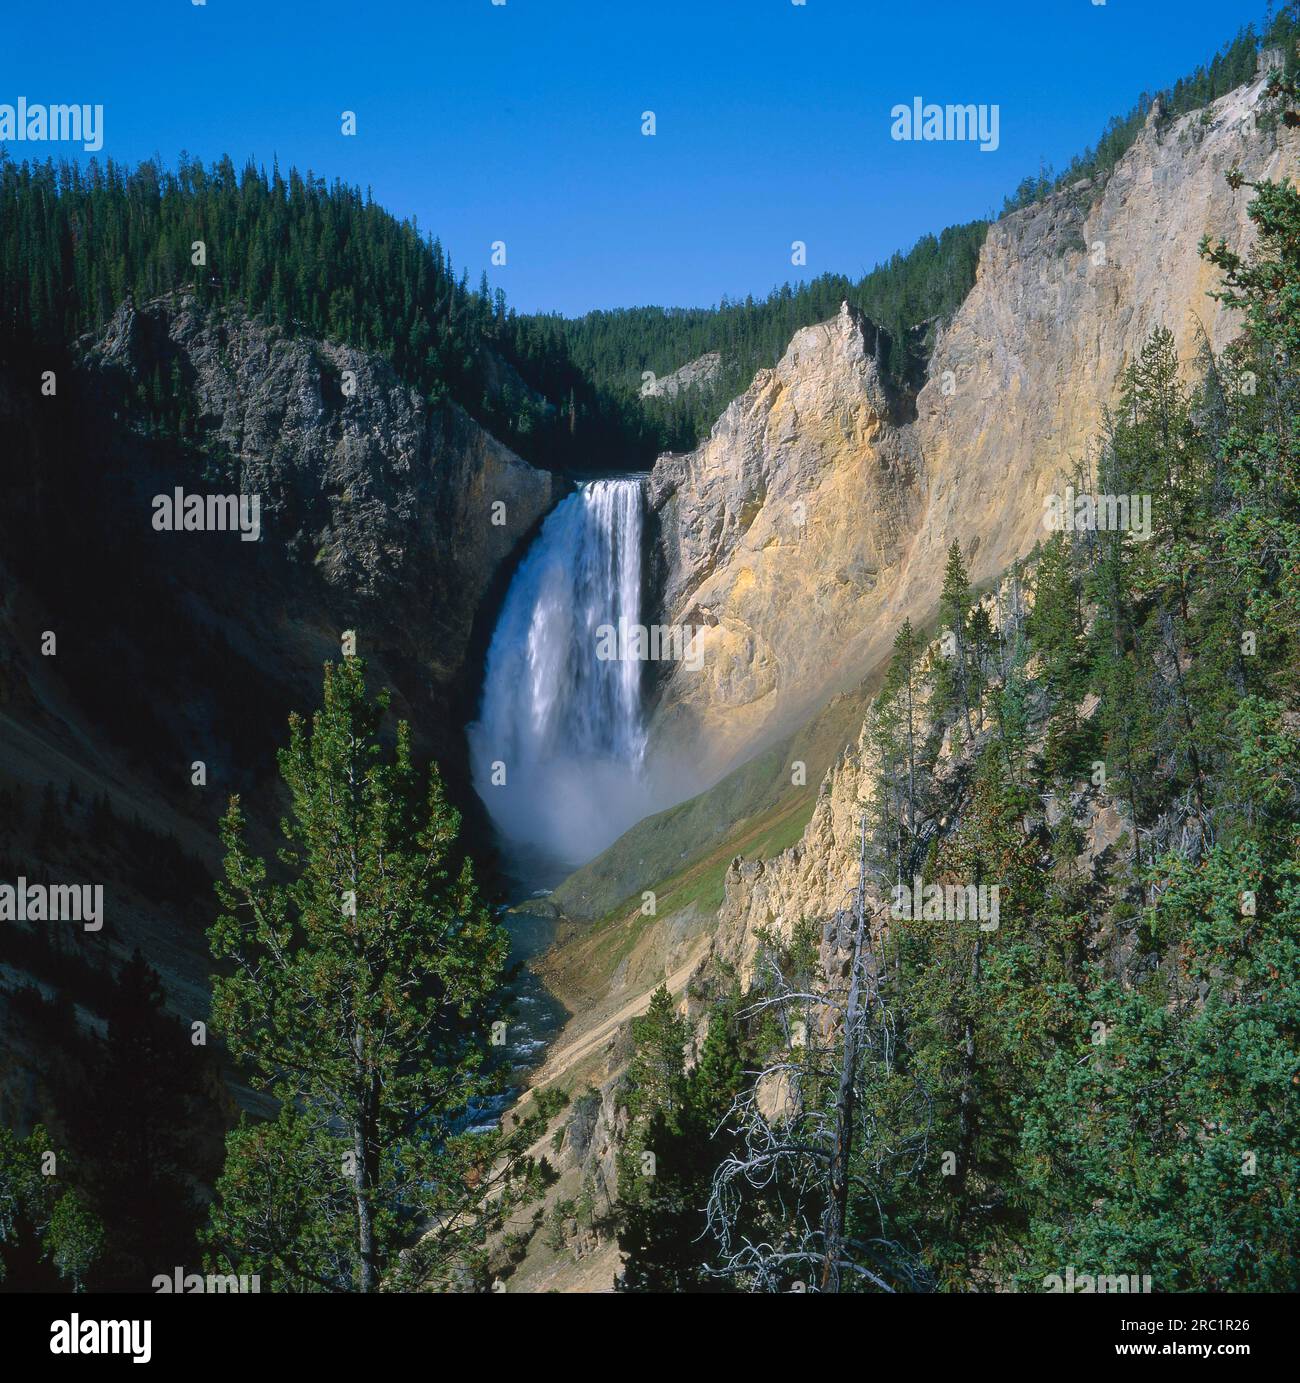 USA, Wyoming, Yellowstone NP, Lower Falls of the Yellowstone River, Yellowstone National Park Foto Stock